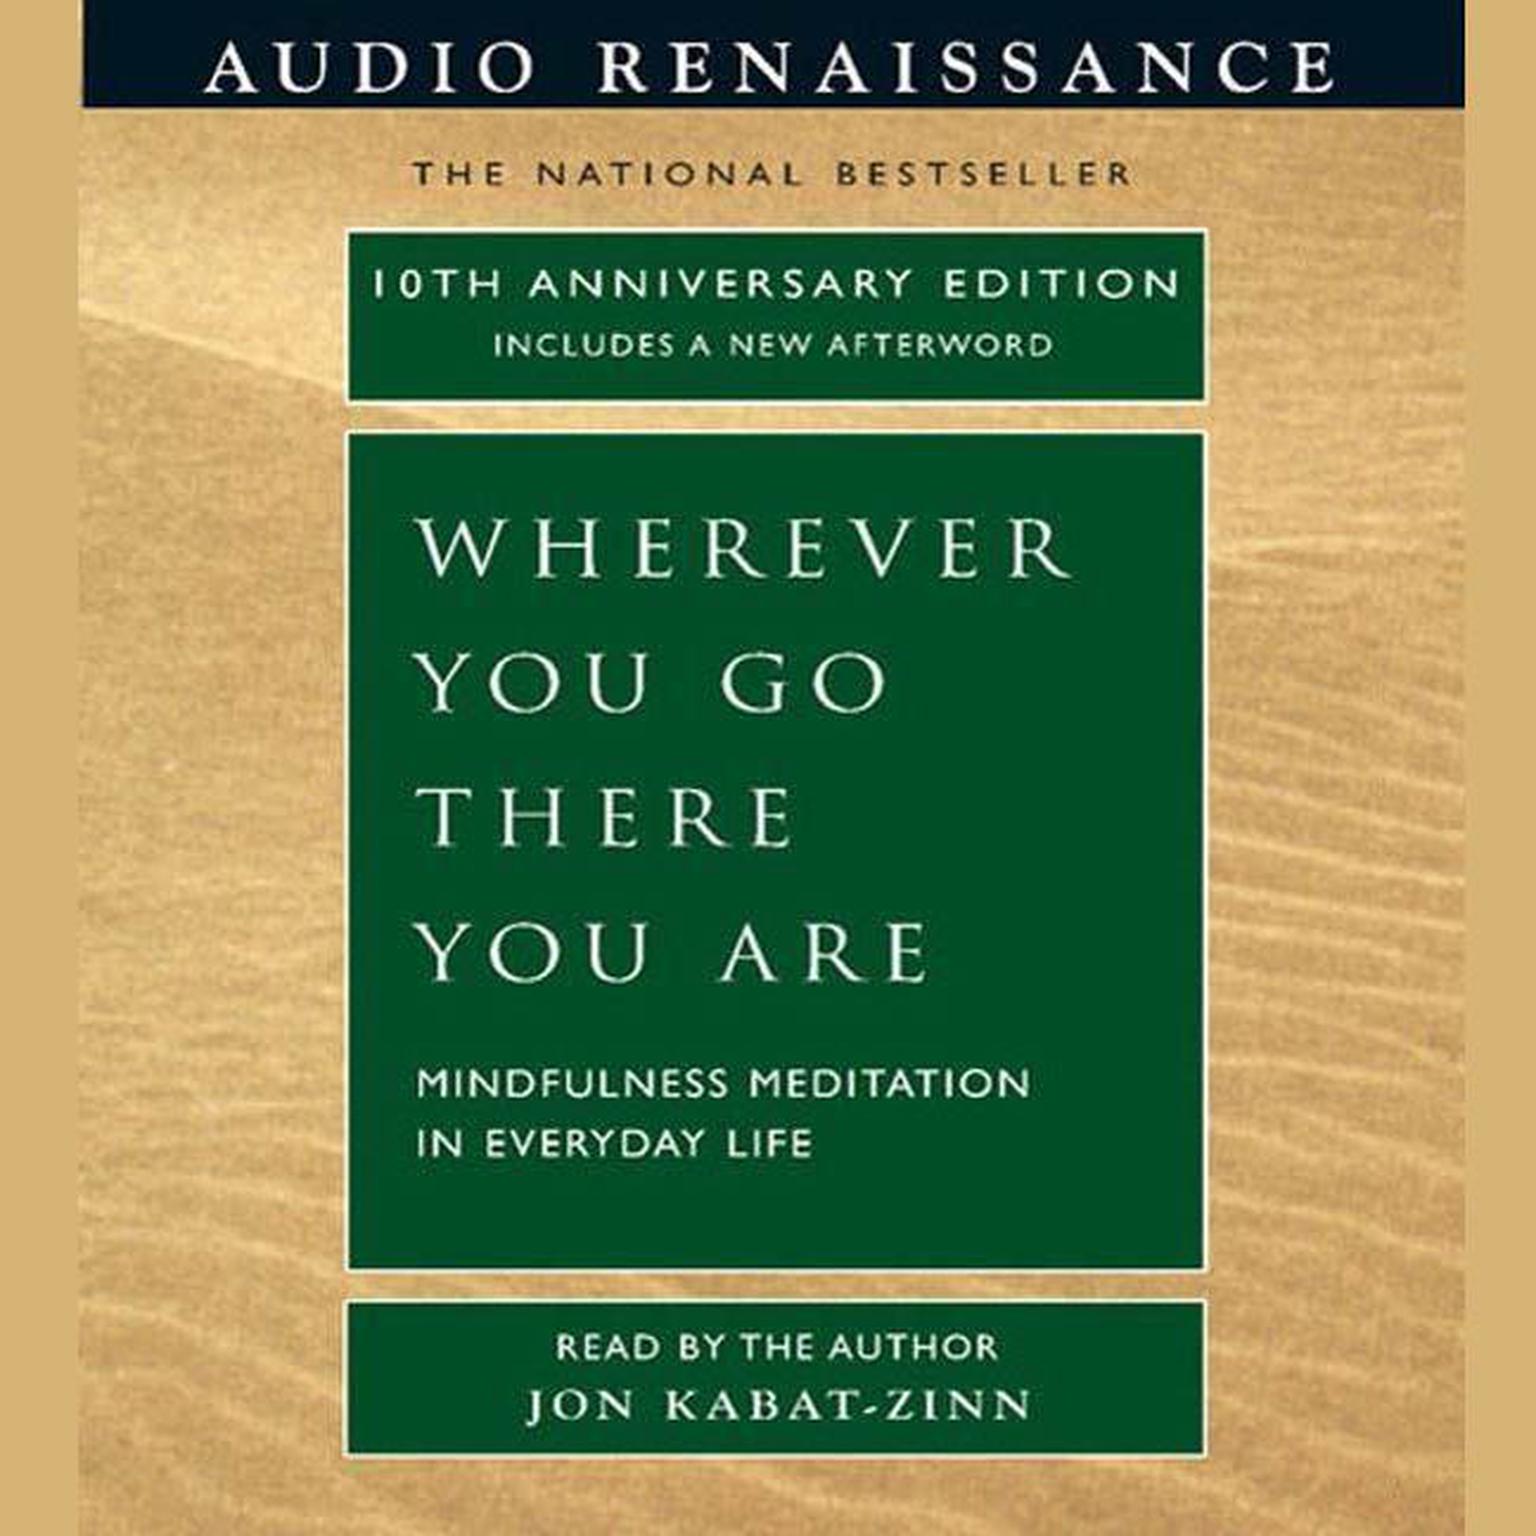 Wherever You Go, There You Are (Abridged): Mindfulness Meditation in Everyday Life Audiobook, by Jon Kabat-Zinn